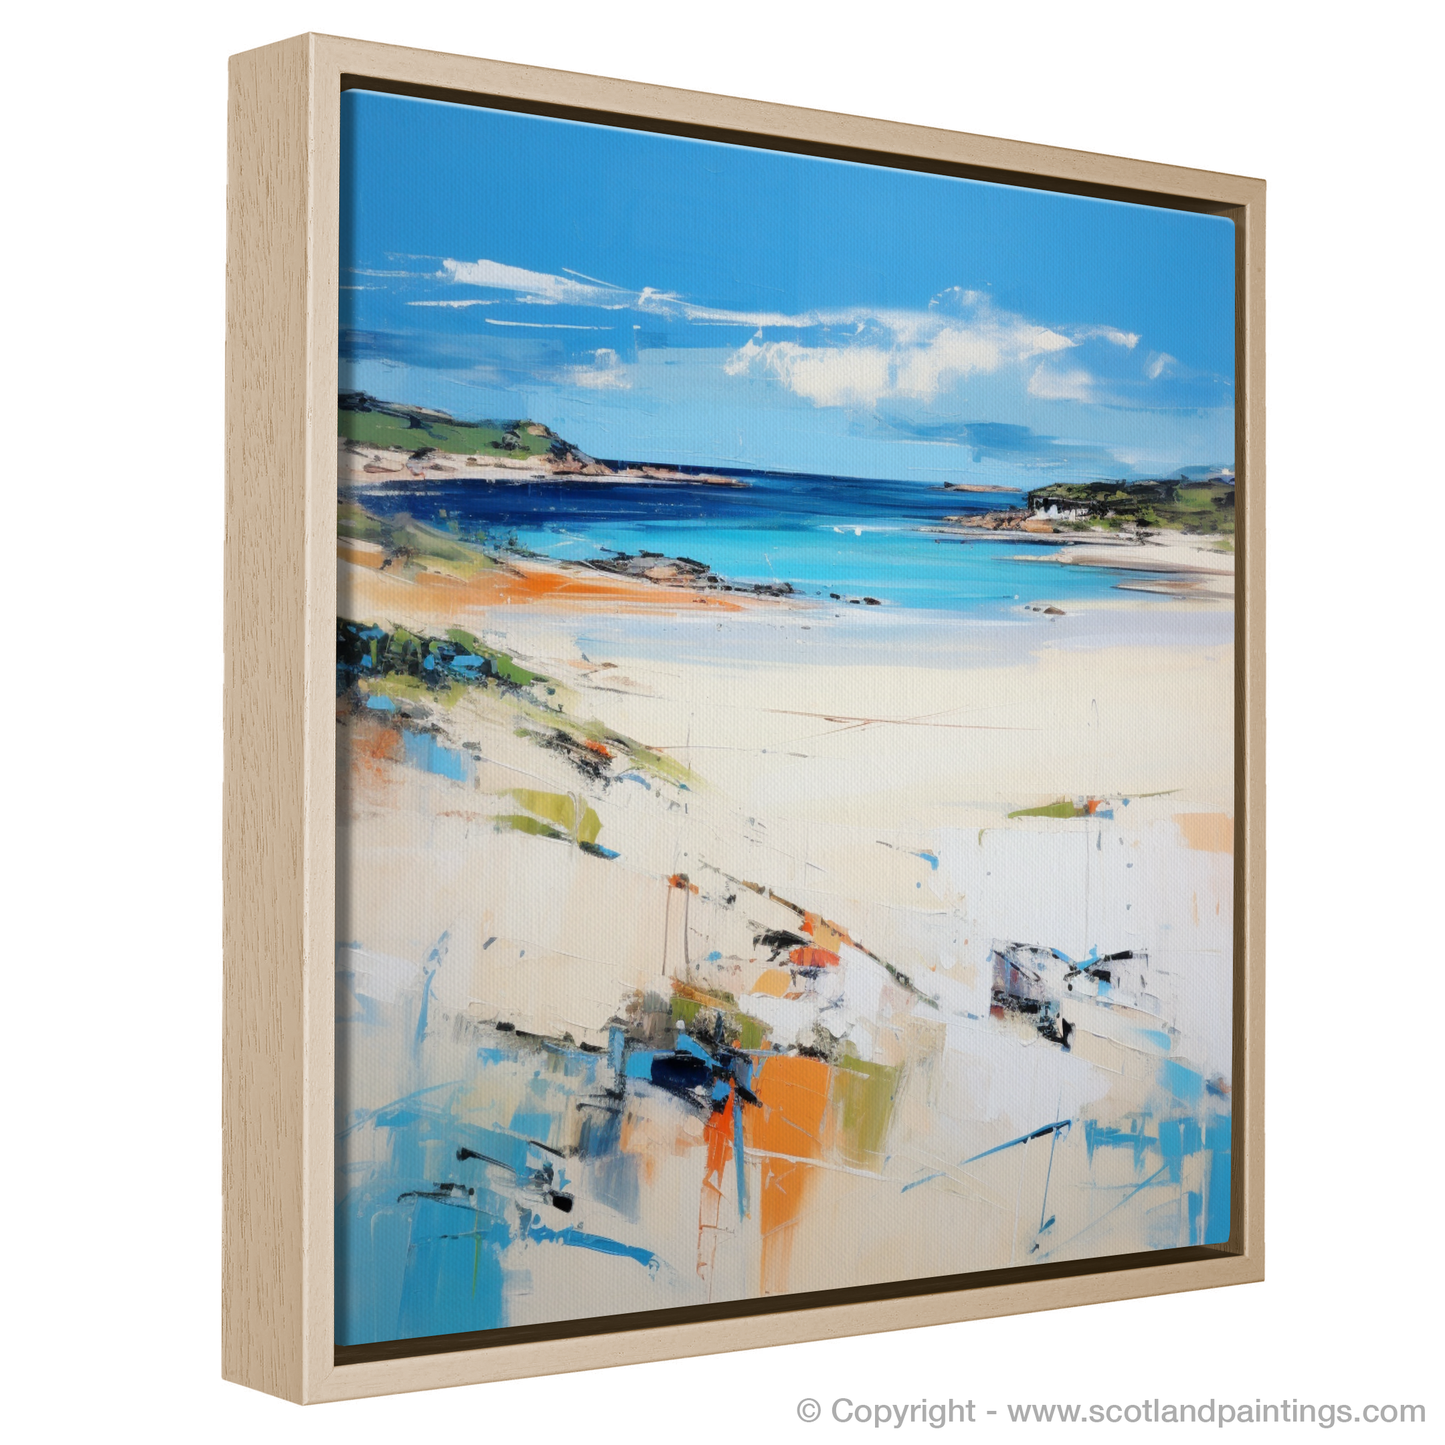 Painting and Art Print of Camusdarach Beach, Arisaig entitled "Camusdarach Beach Emotions in Colour: An Abstract Impressionist Journey".